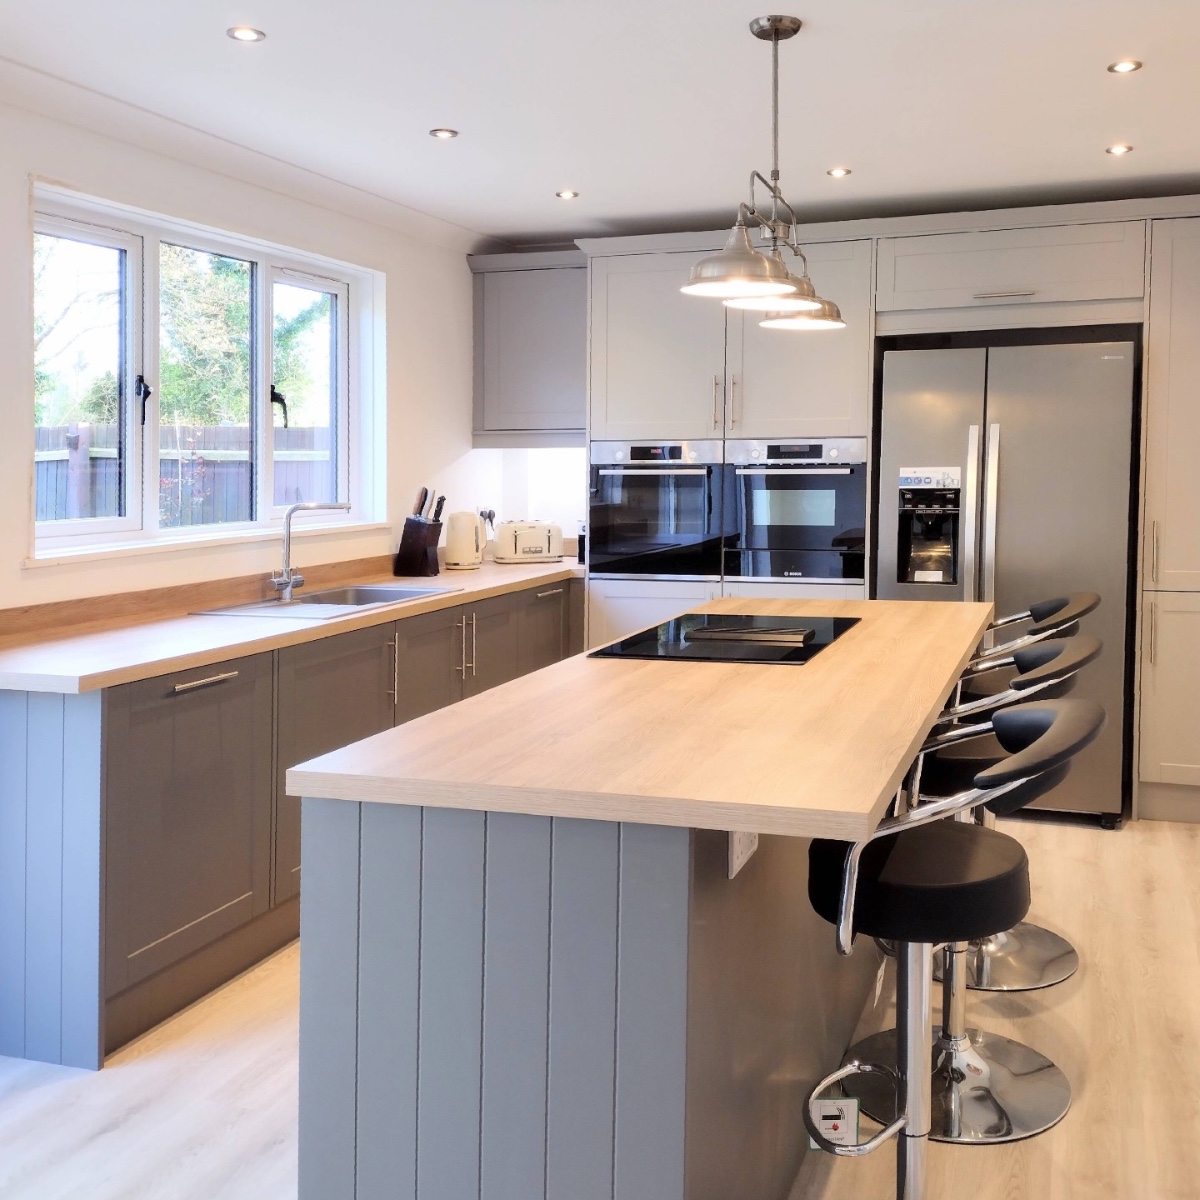 Combining modern sophistication with the cozy comforts of home in this gorgeous Shaker Classic kitchen in lava grey matt 🏡✨ #wrenkitchens #wrenovation #greykitchen #kitchendesign #kitcheninspo #modernliving #kitcheninspiration #minimalism #oakworktops